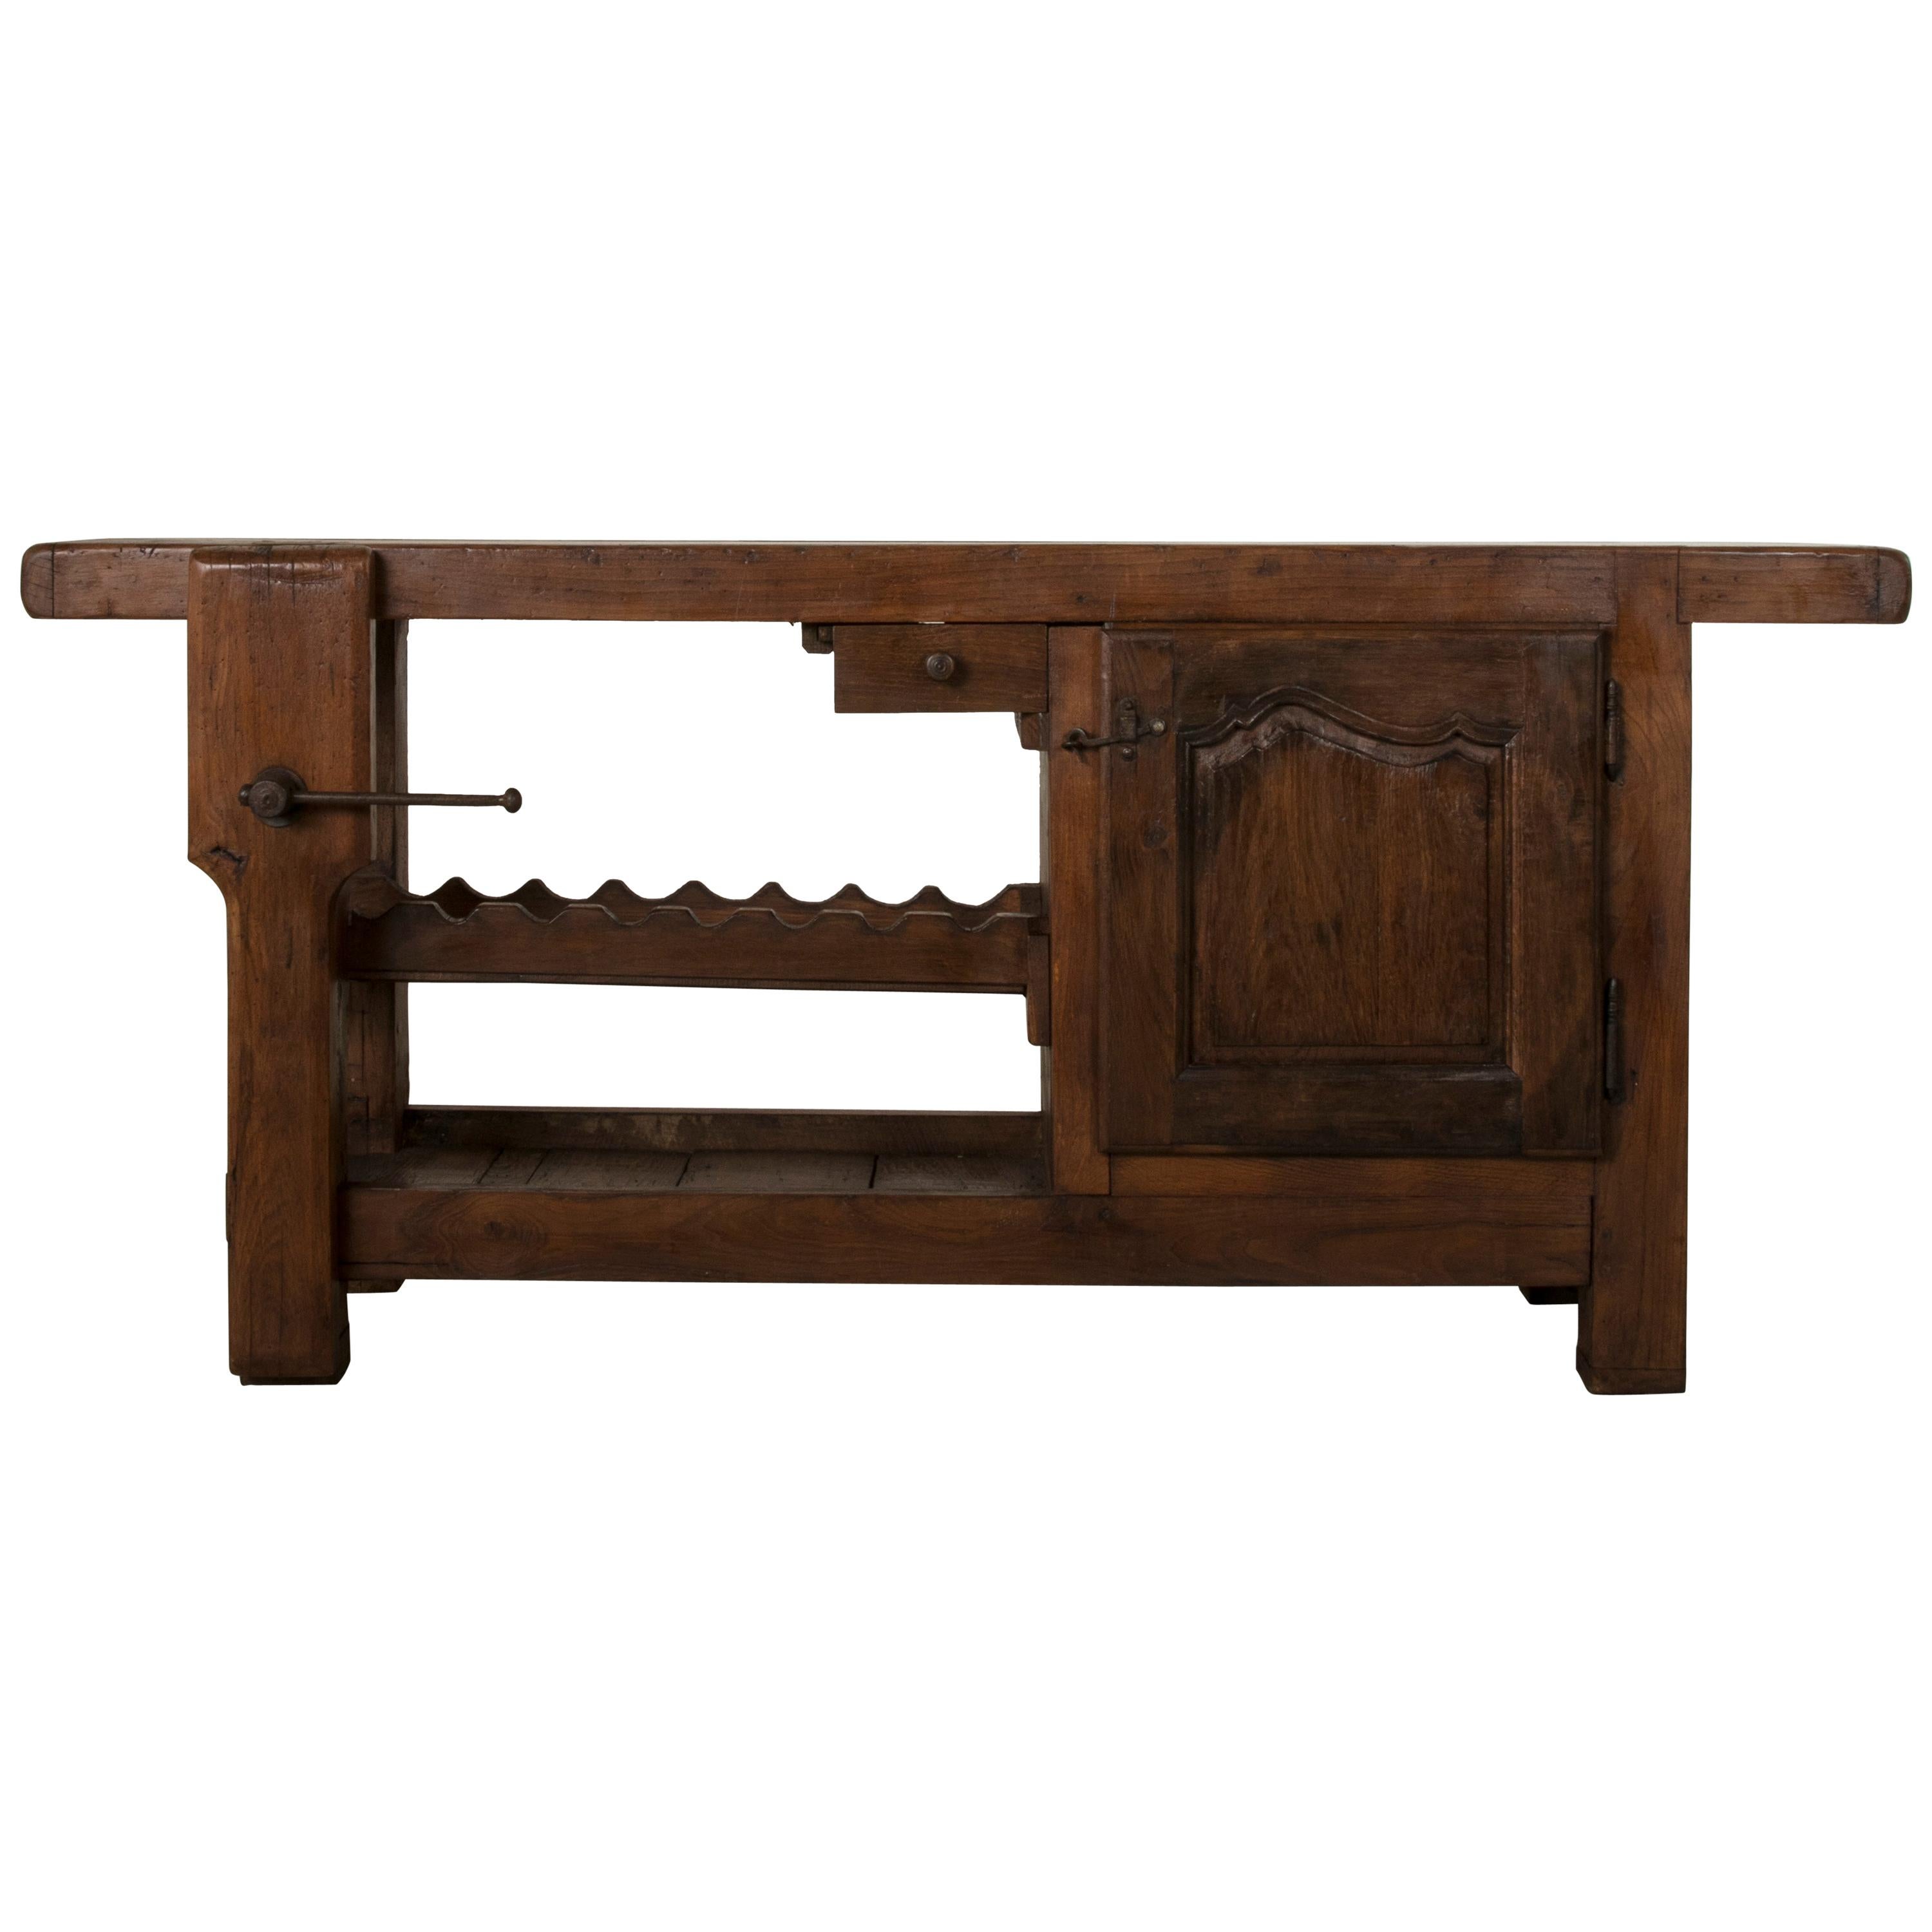 Early 20th Century French Oak Workbench, Console, Sofa Table, Vise and Wine Rack